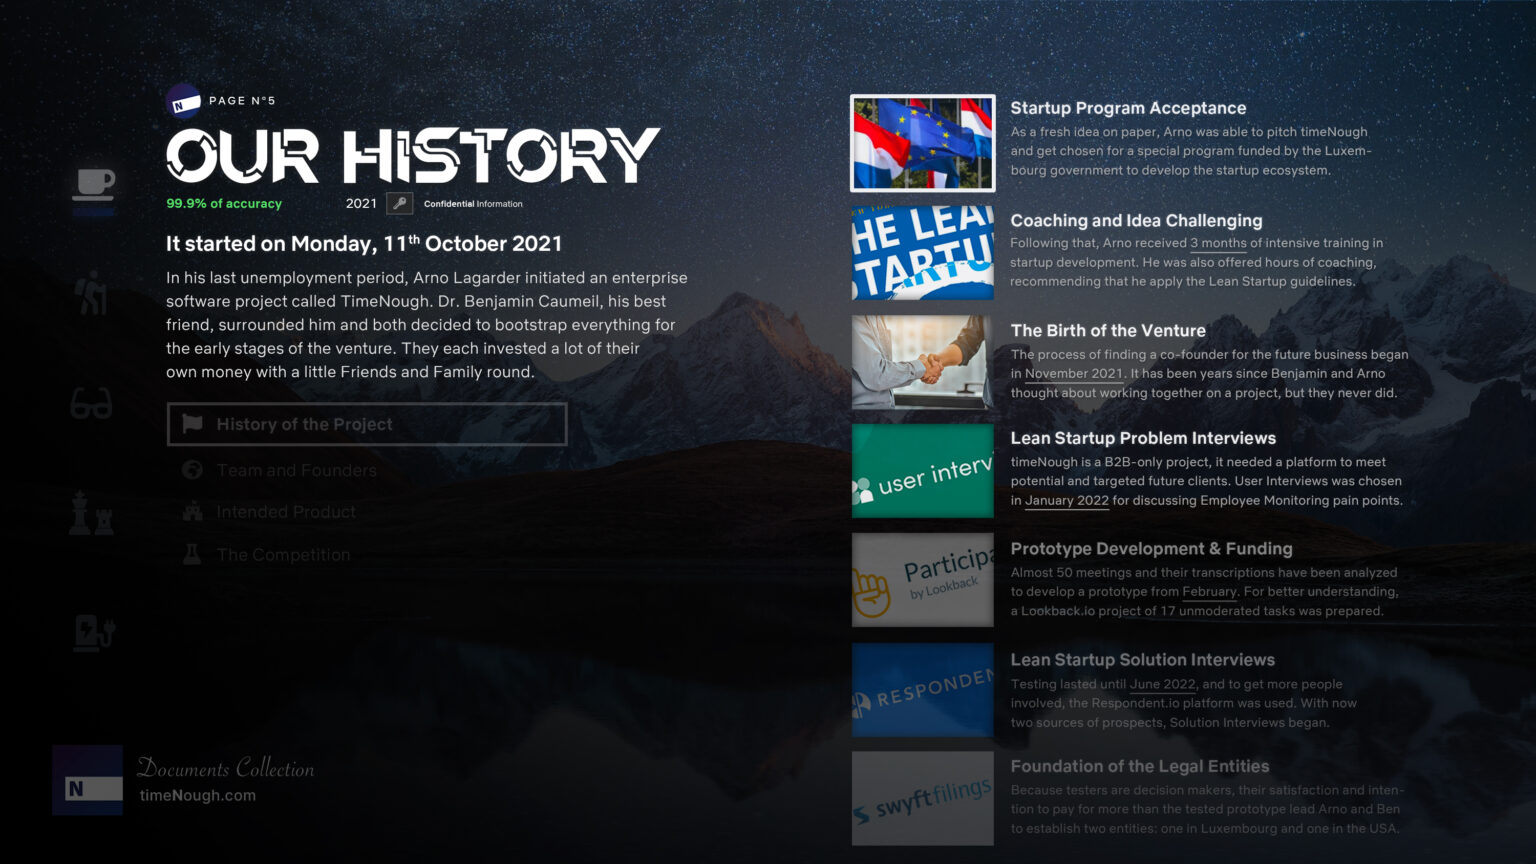 Deck's page number 5, about the project's history